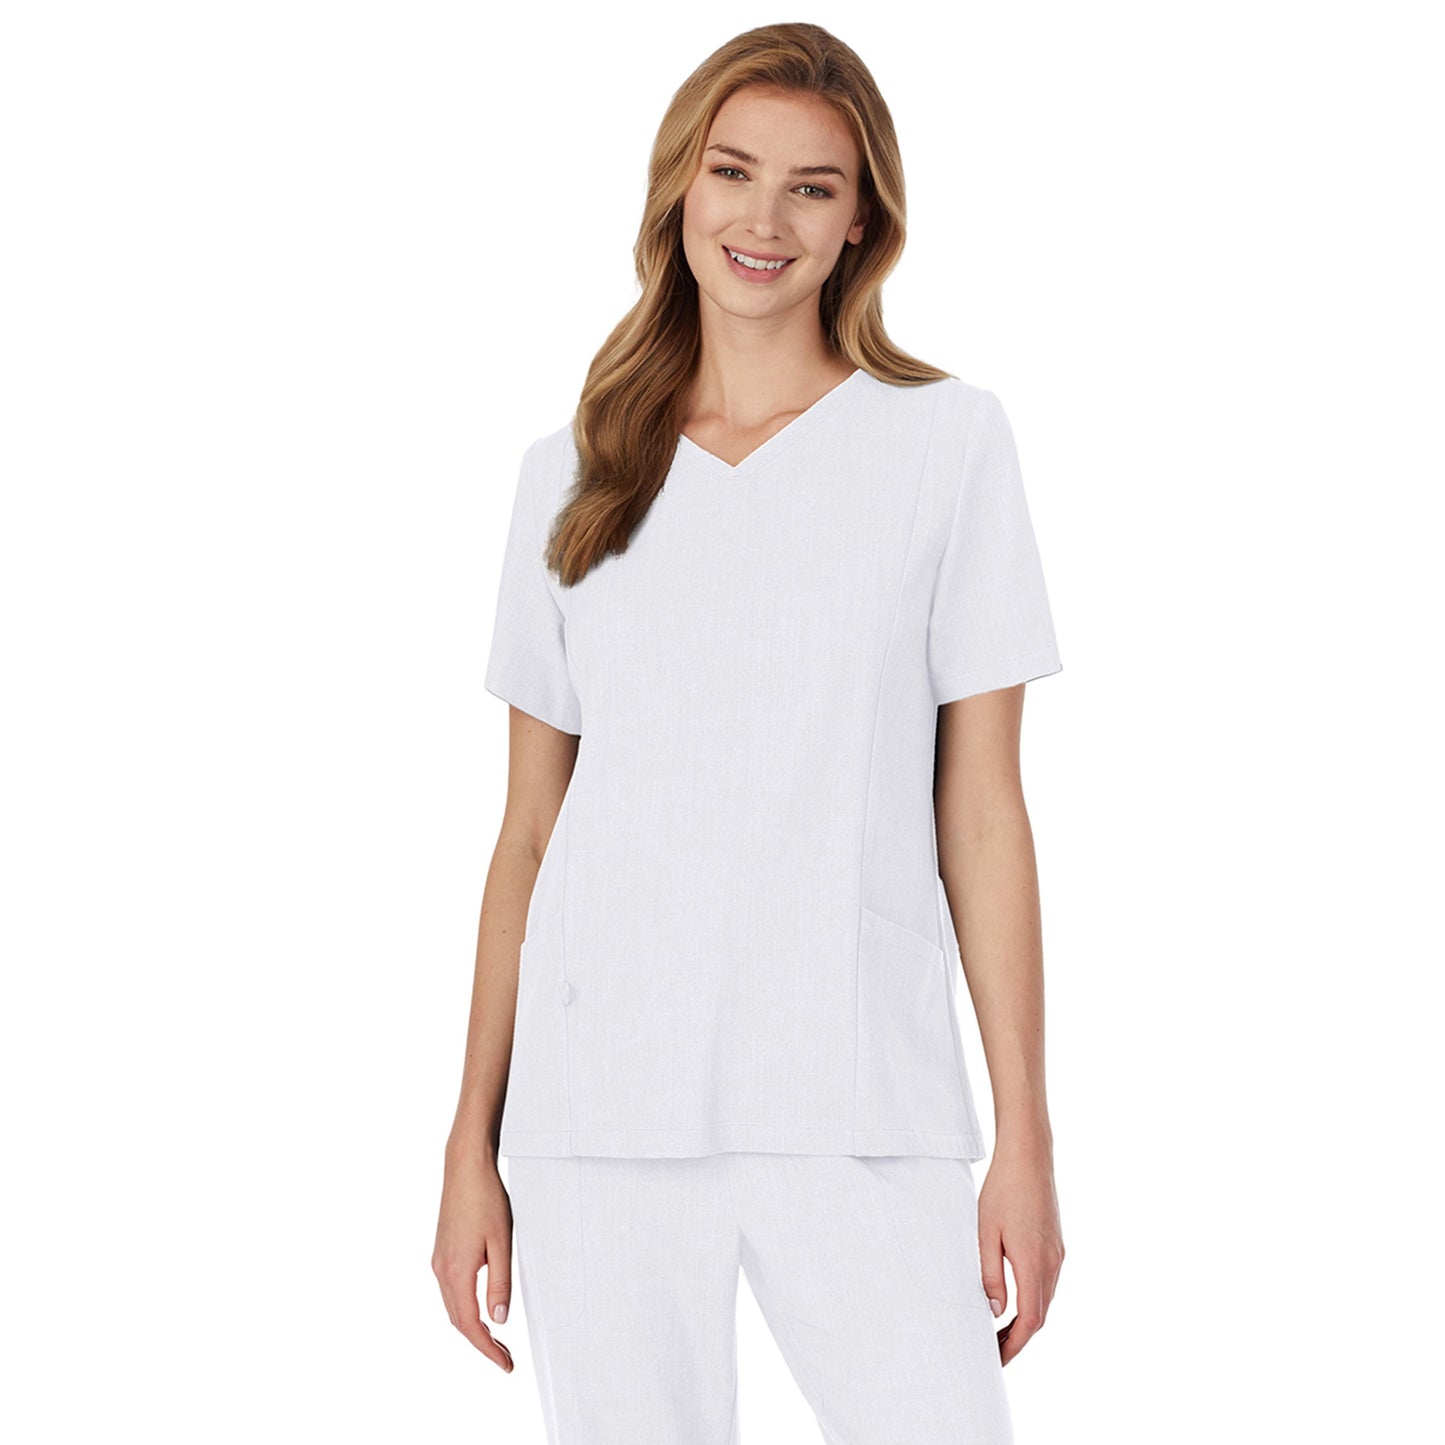 White;A lady wearing white scrub v-neck top with side pockets petite.